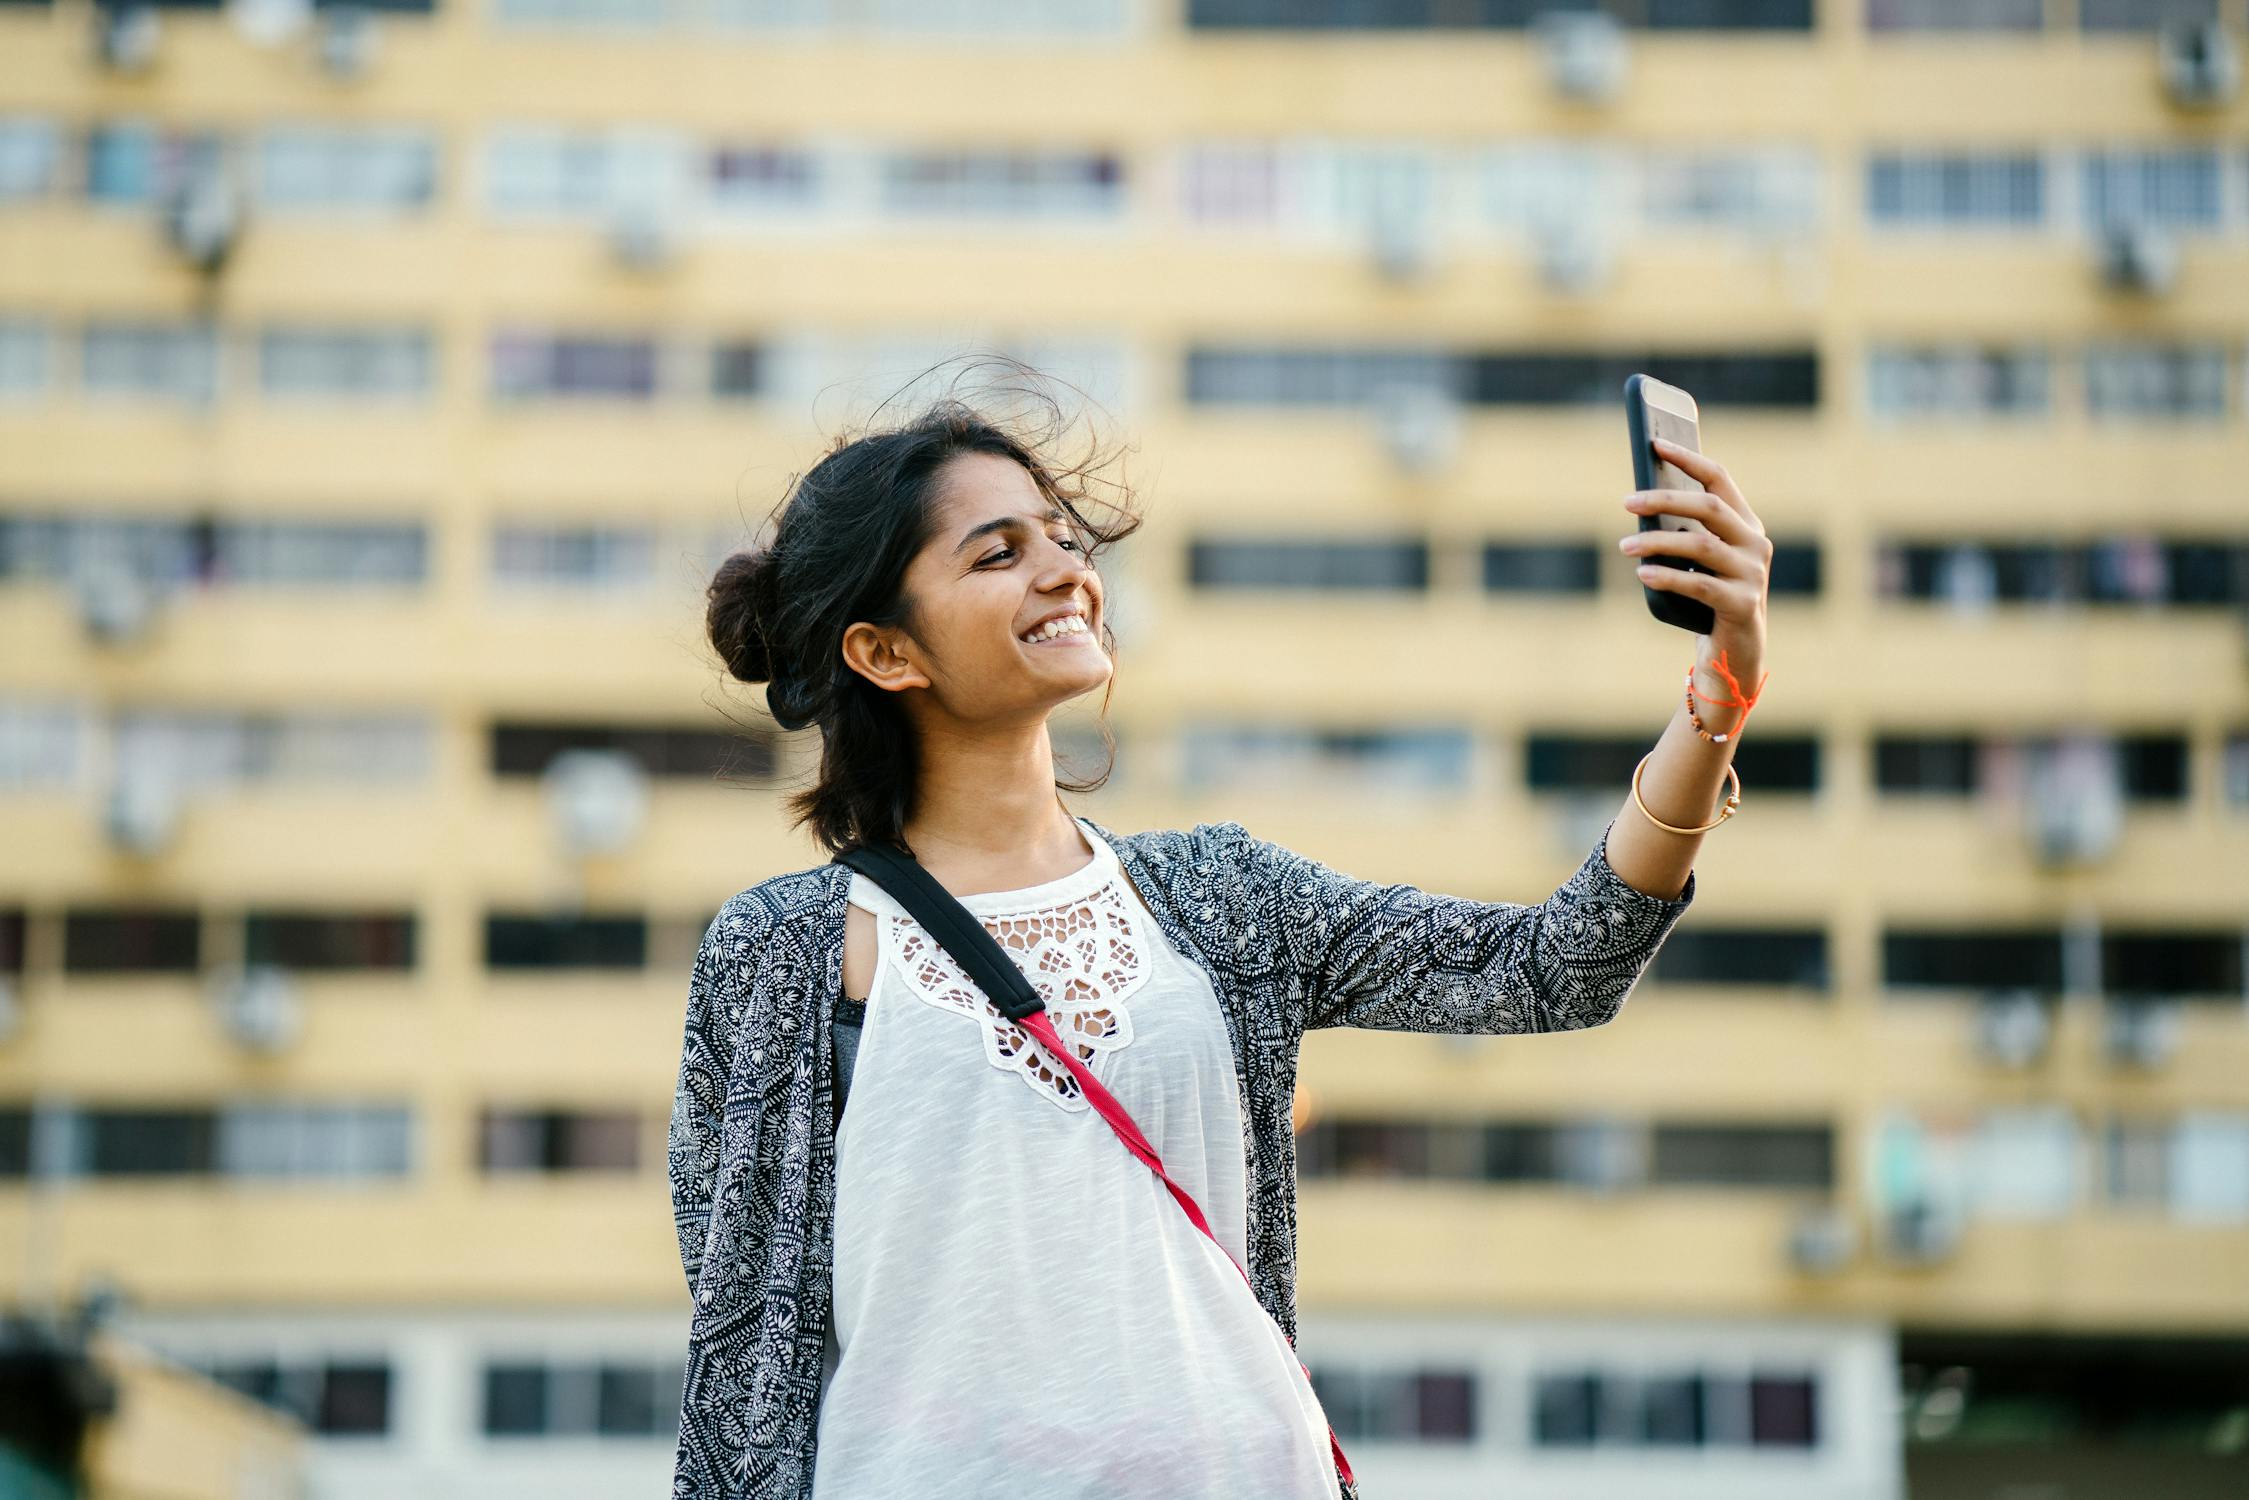 Self Esteem by Photo by mentatdgt from Pexels: https://www.pexels.com/photo/smiling-woman-holding-black-smartphone-937541/